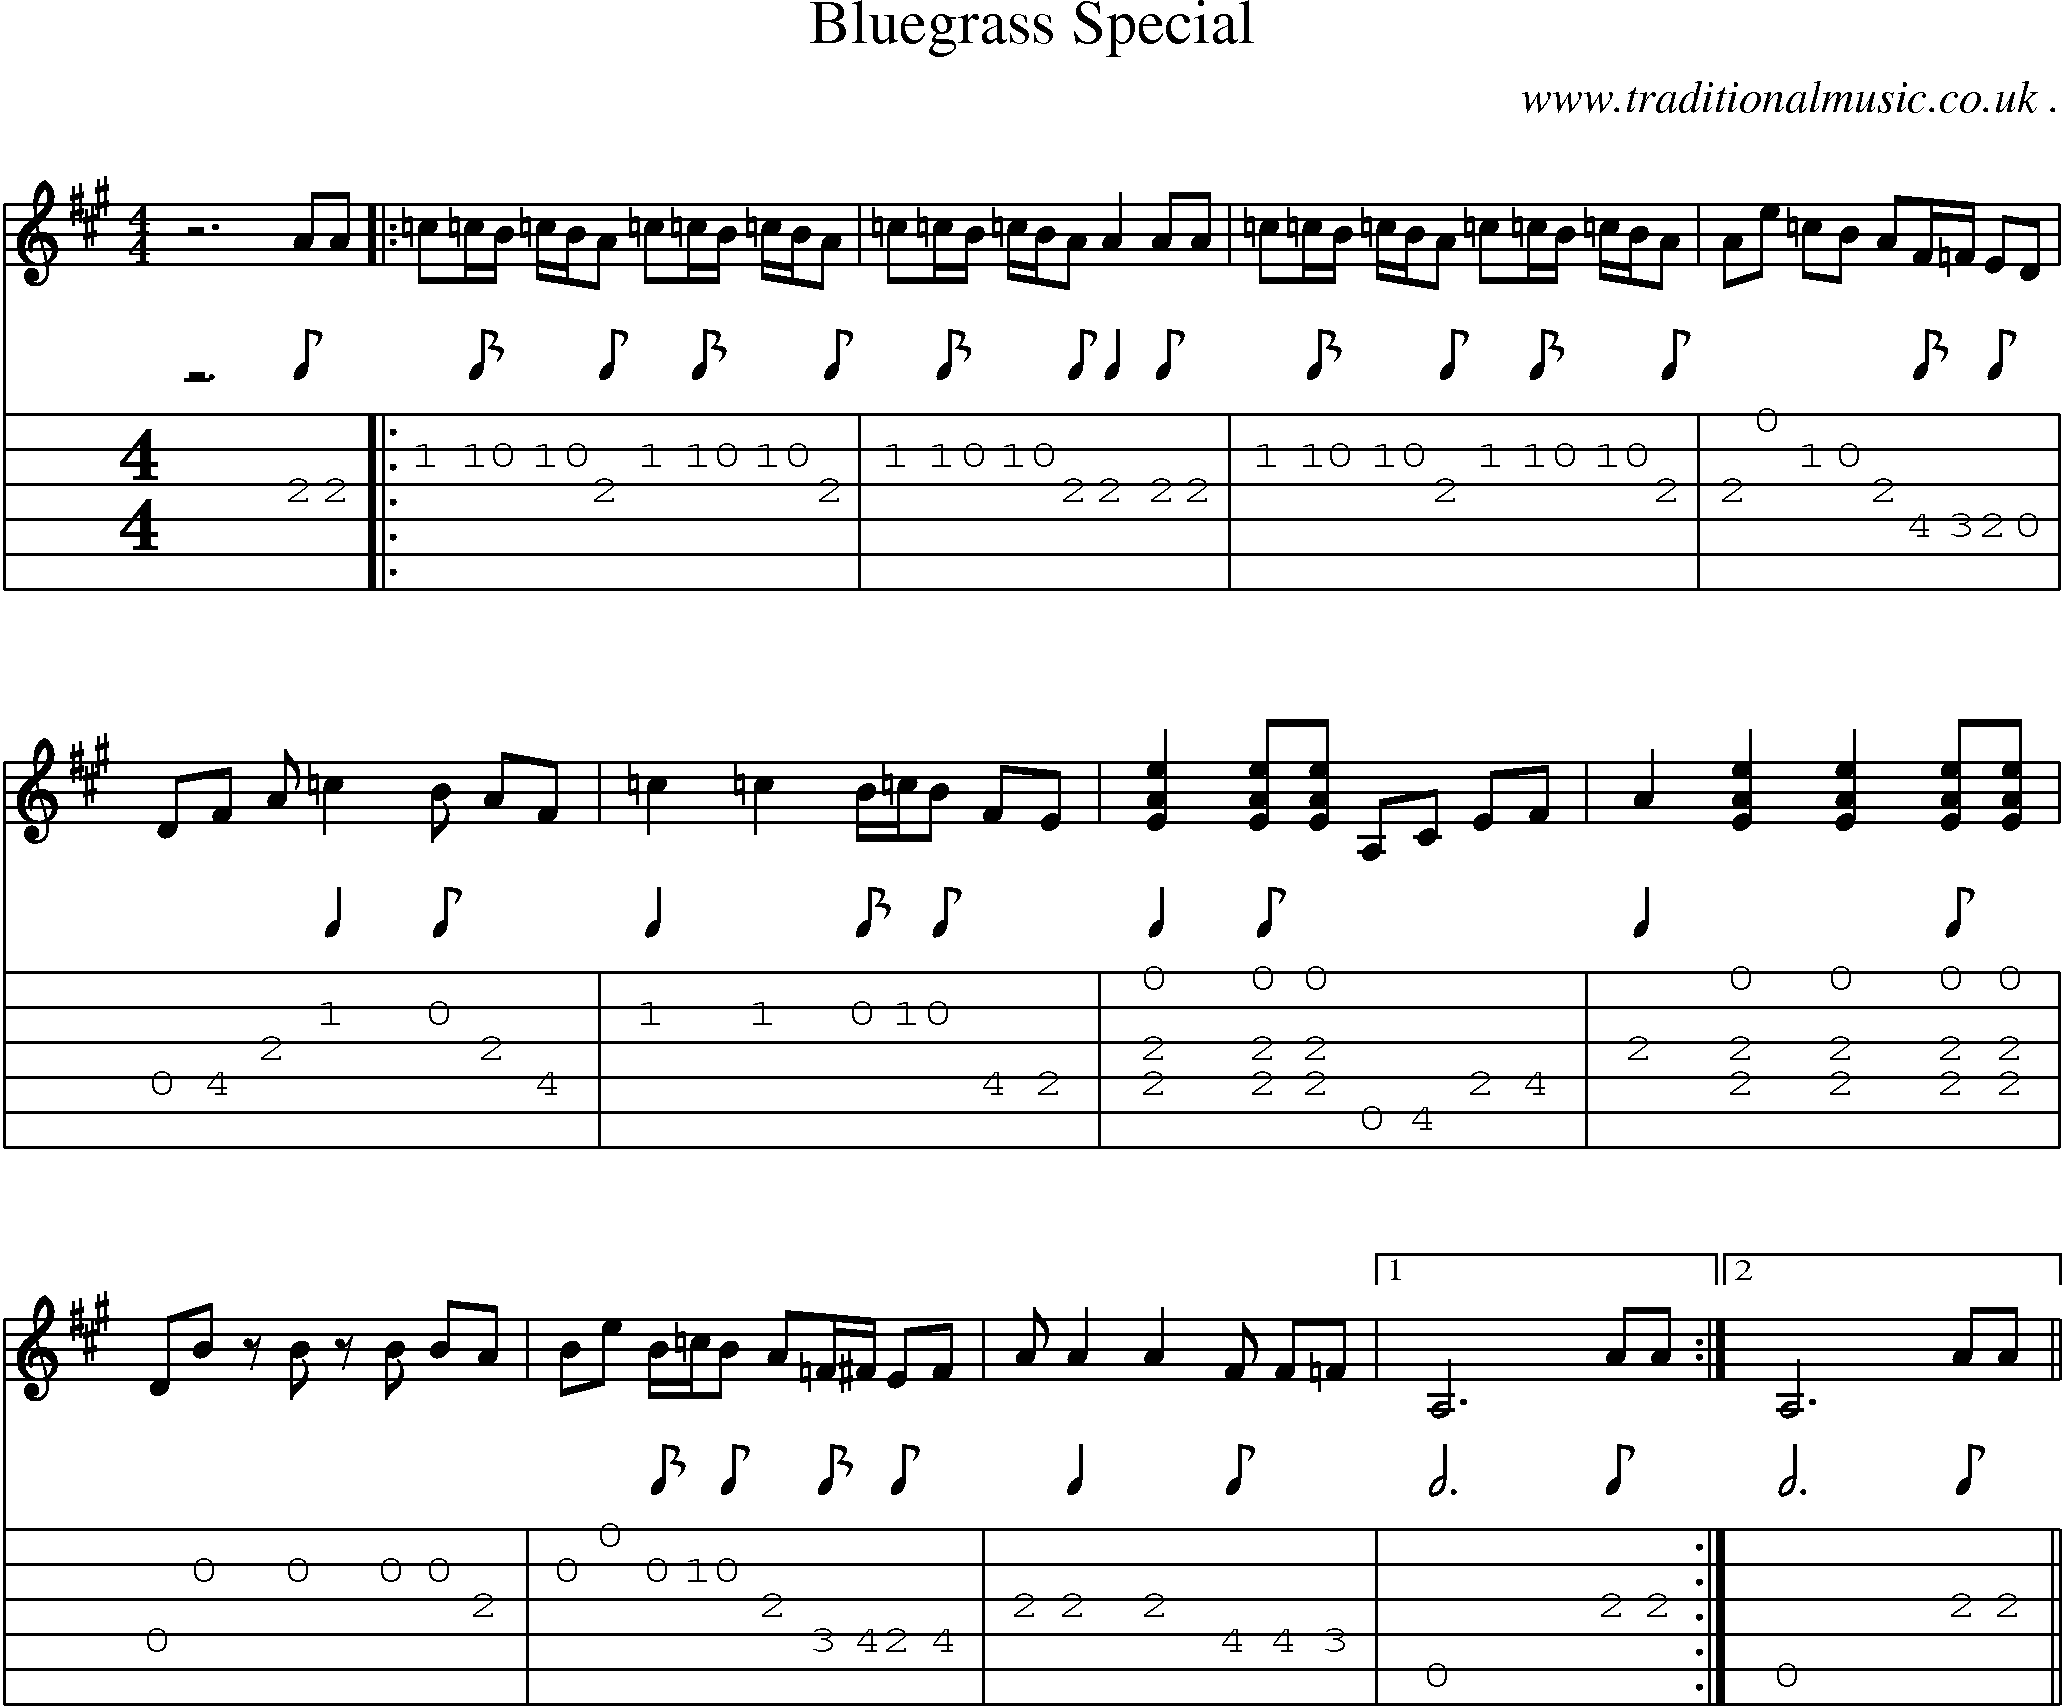 Music Score and Guitar Tabs for Bluegrass Special